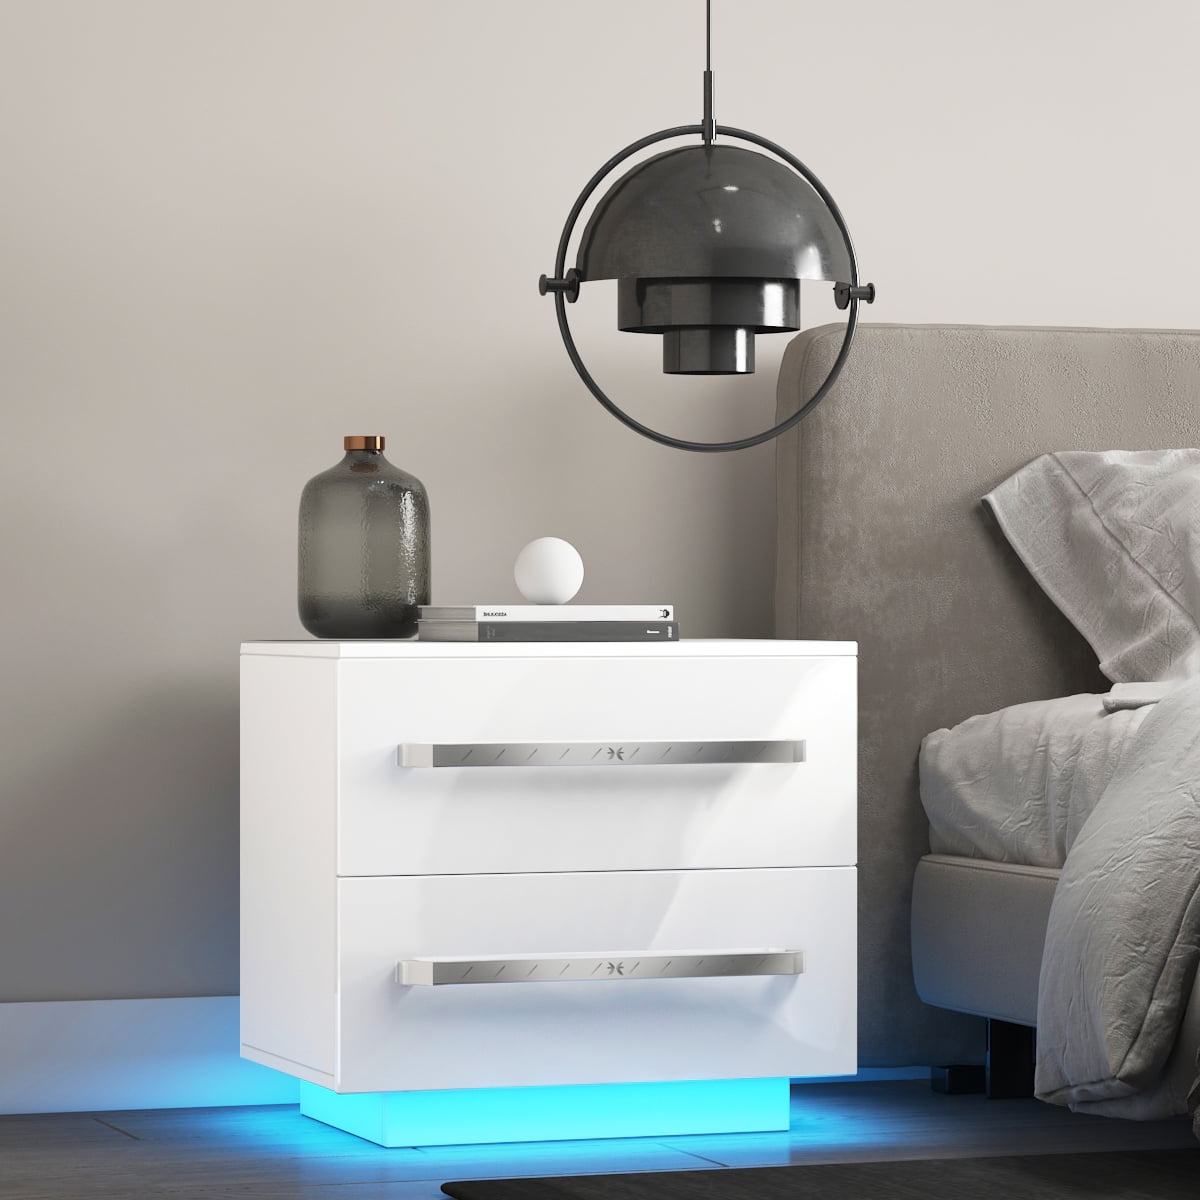 Details about   2 Glossy Drawers RGB LED Light Nightstand Modern Bedside Table with Remote White 